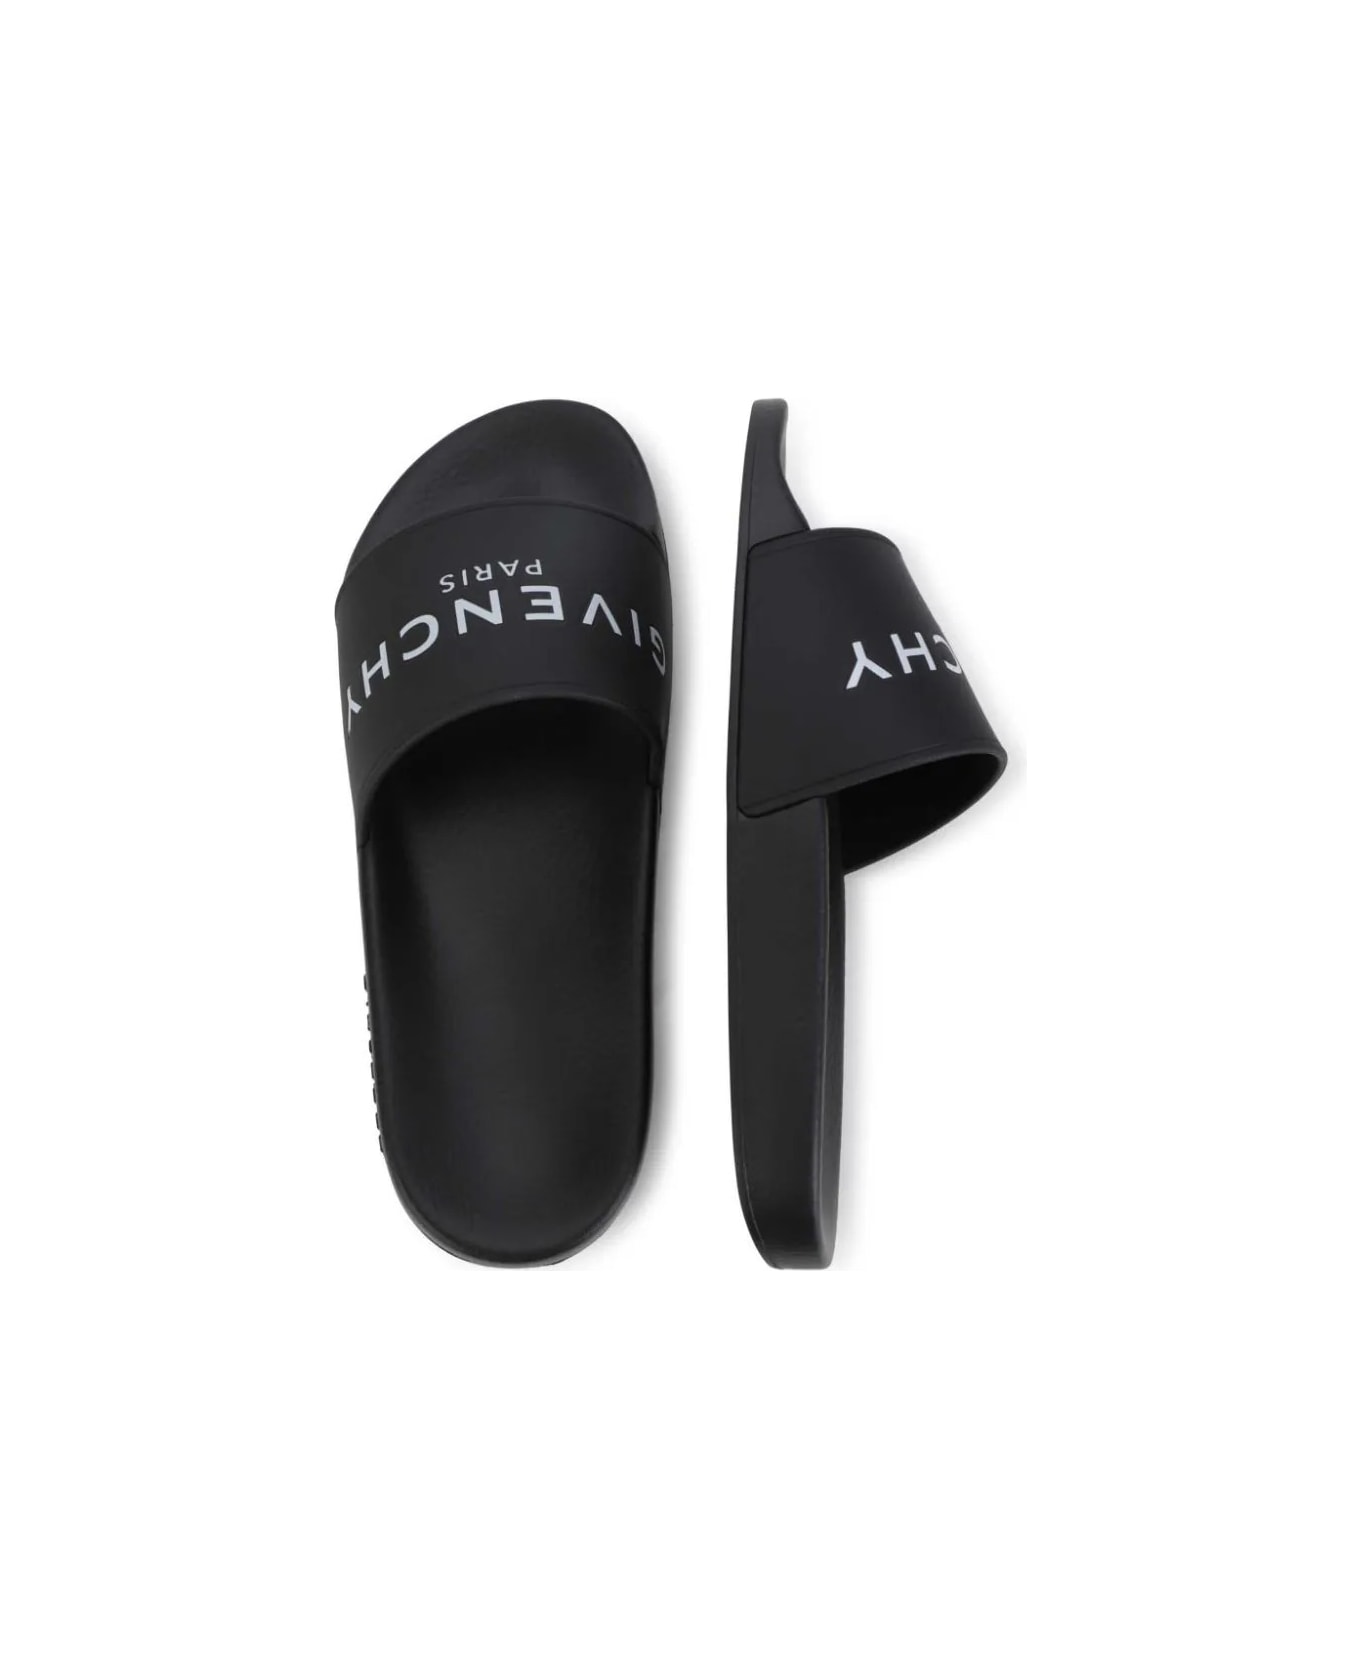 Givenchy Slippers In Black Rubber - Black